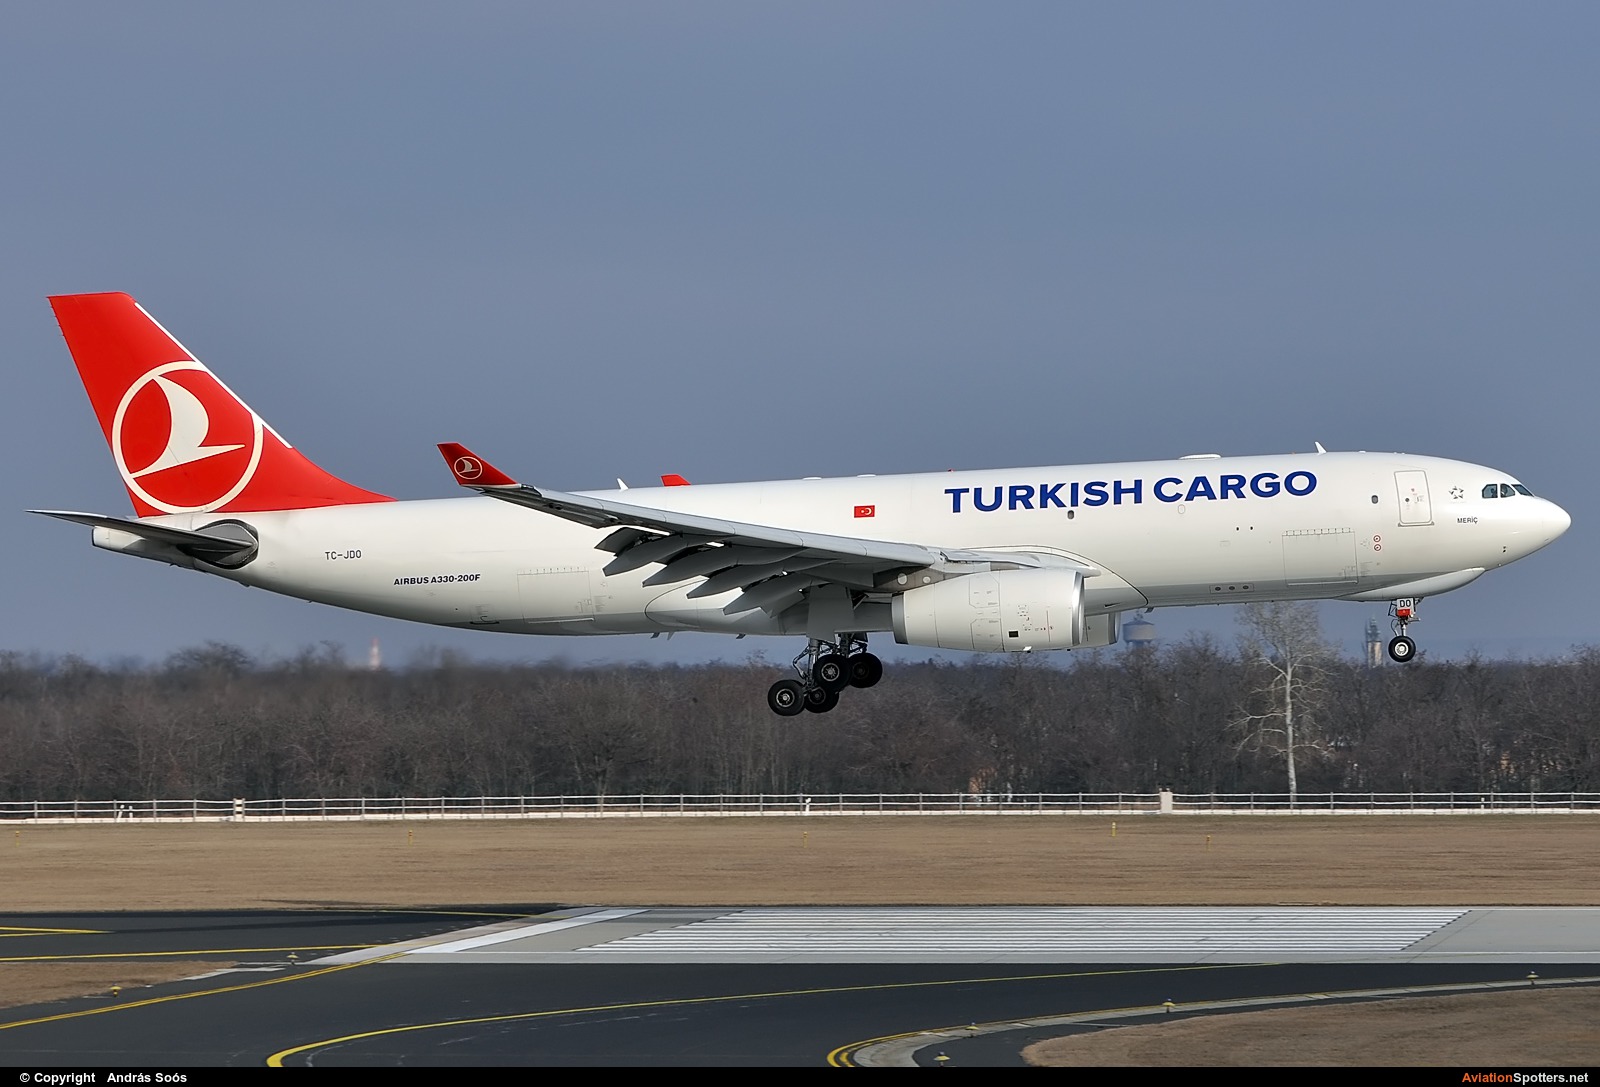 Turkish Airlines Cargo  -  A330-200  (TC-JDO) By András Soós (sas1965)